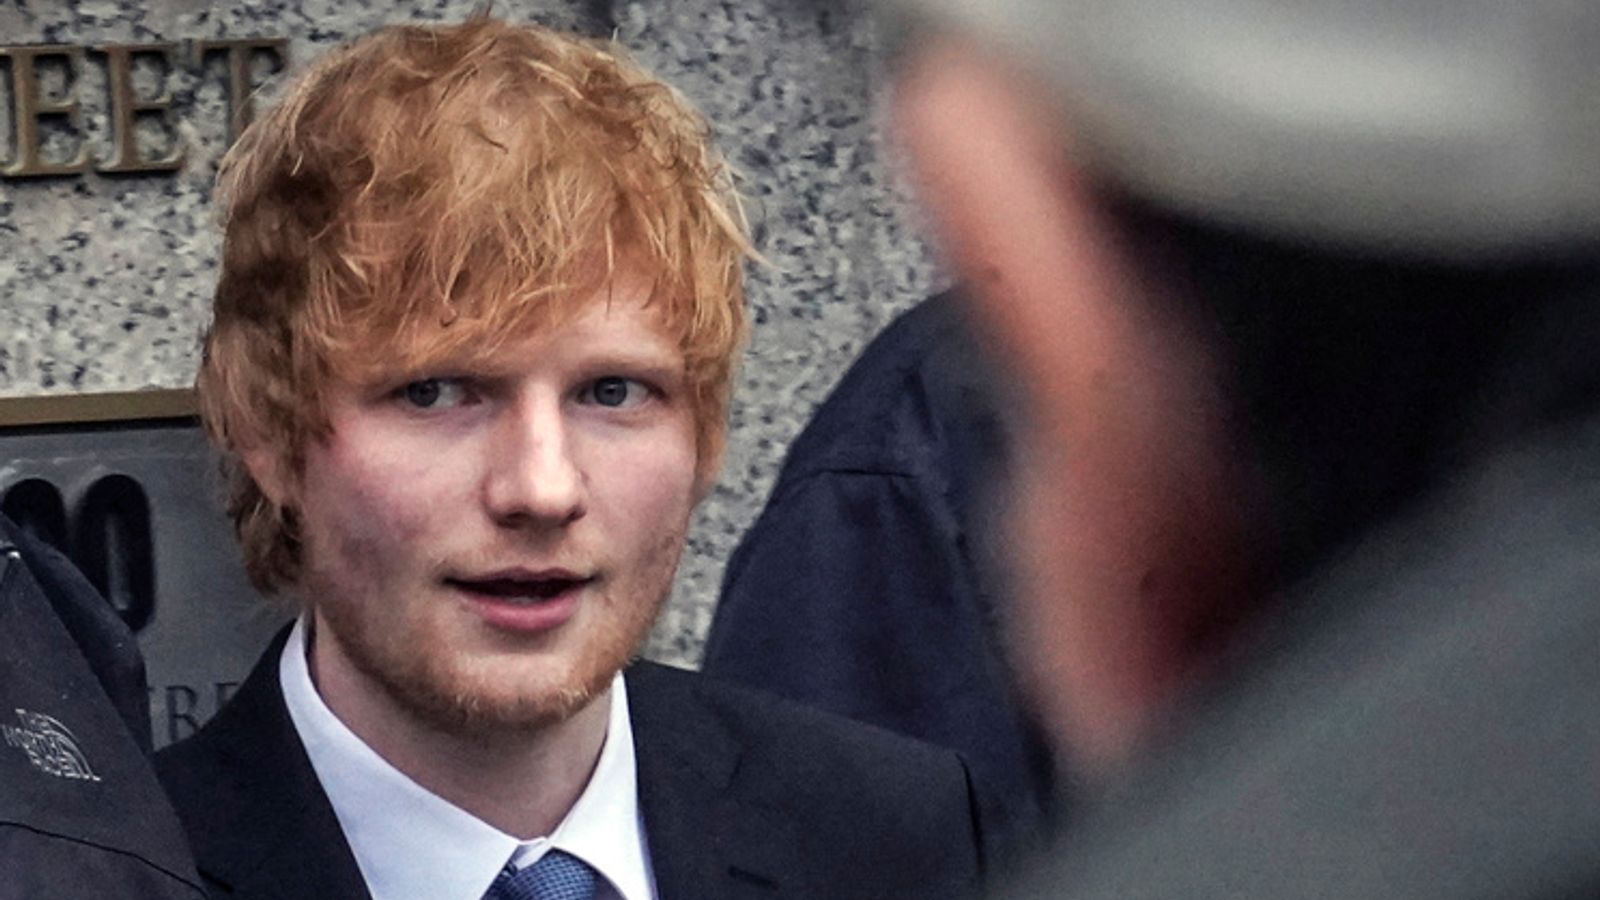 Ed Sheeran plays guitar in New York court as he tries to prove he didn't copy Marvin Gaye track